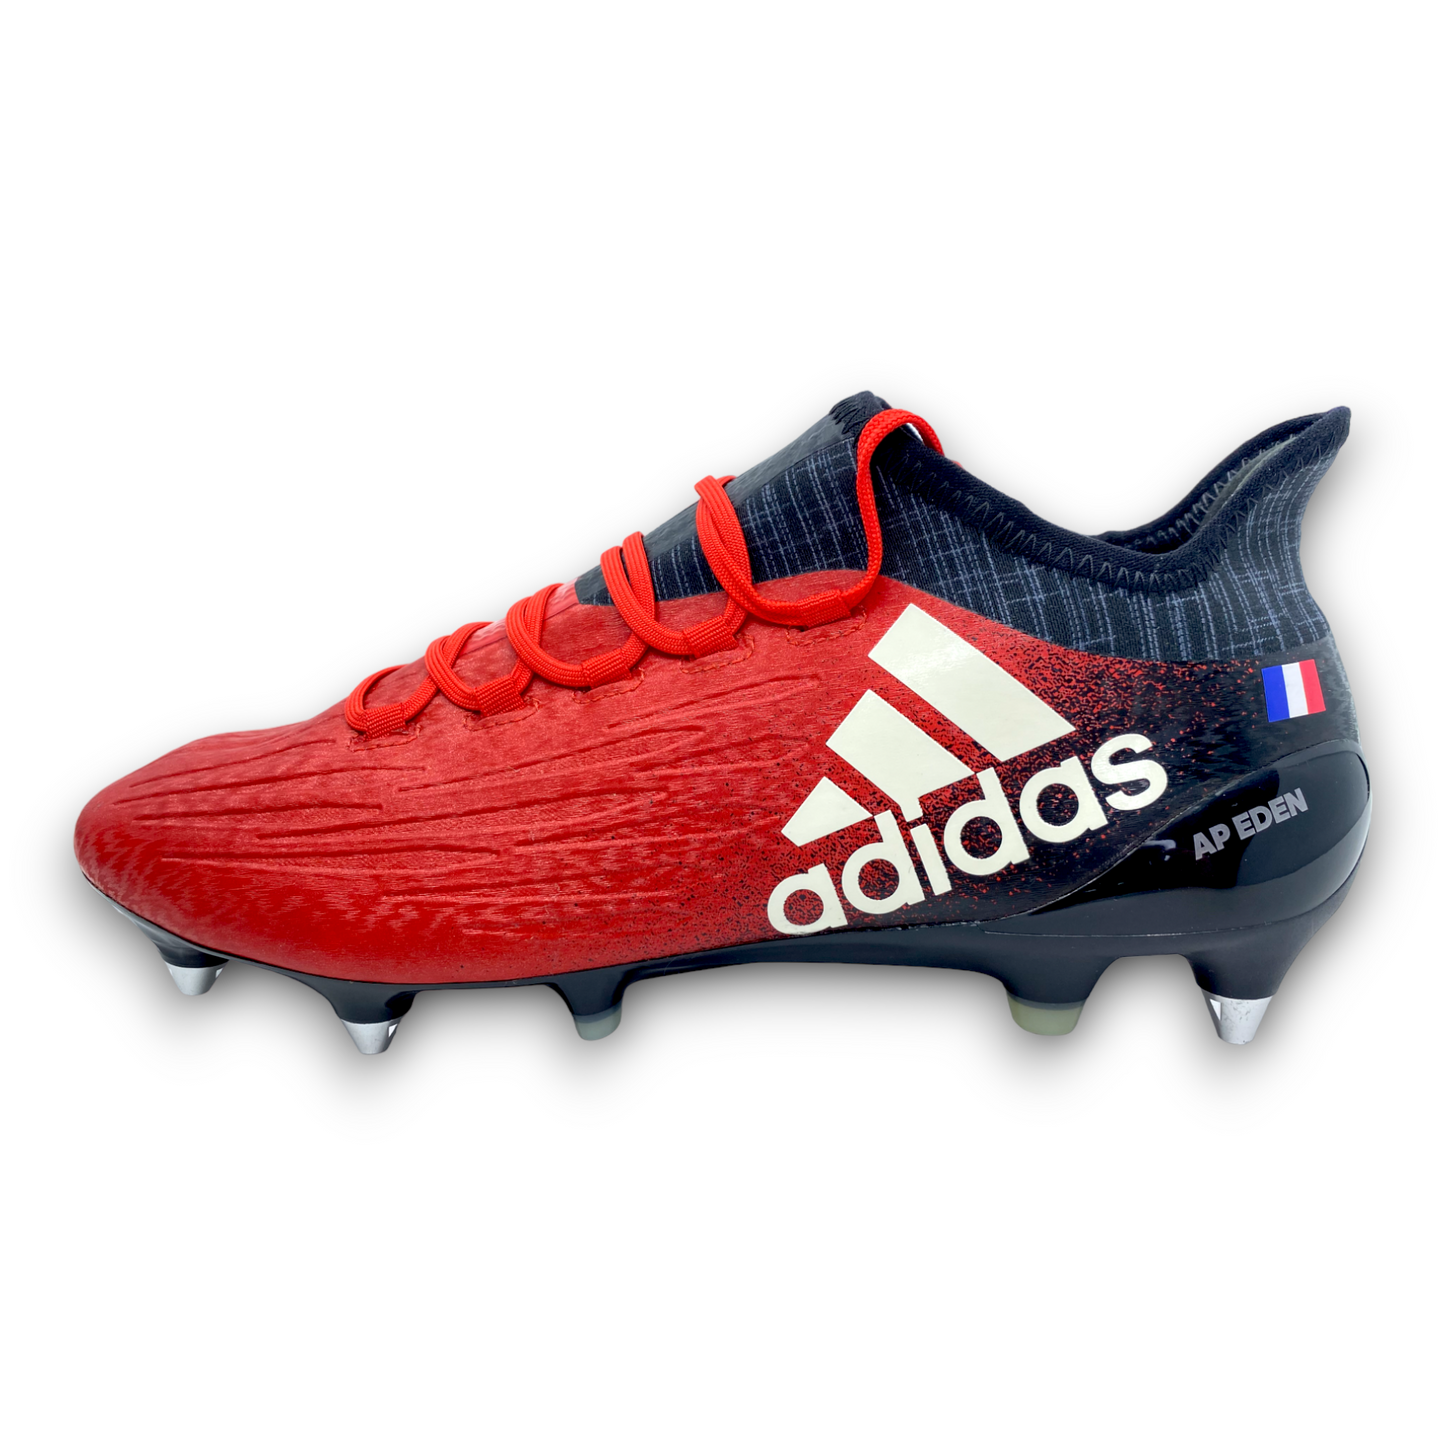 Adidas X 16.1 SG "Red Limit Pack" Sponsorship Athlete service Andre Pierre Gignac